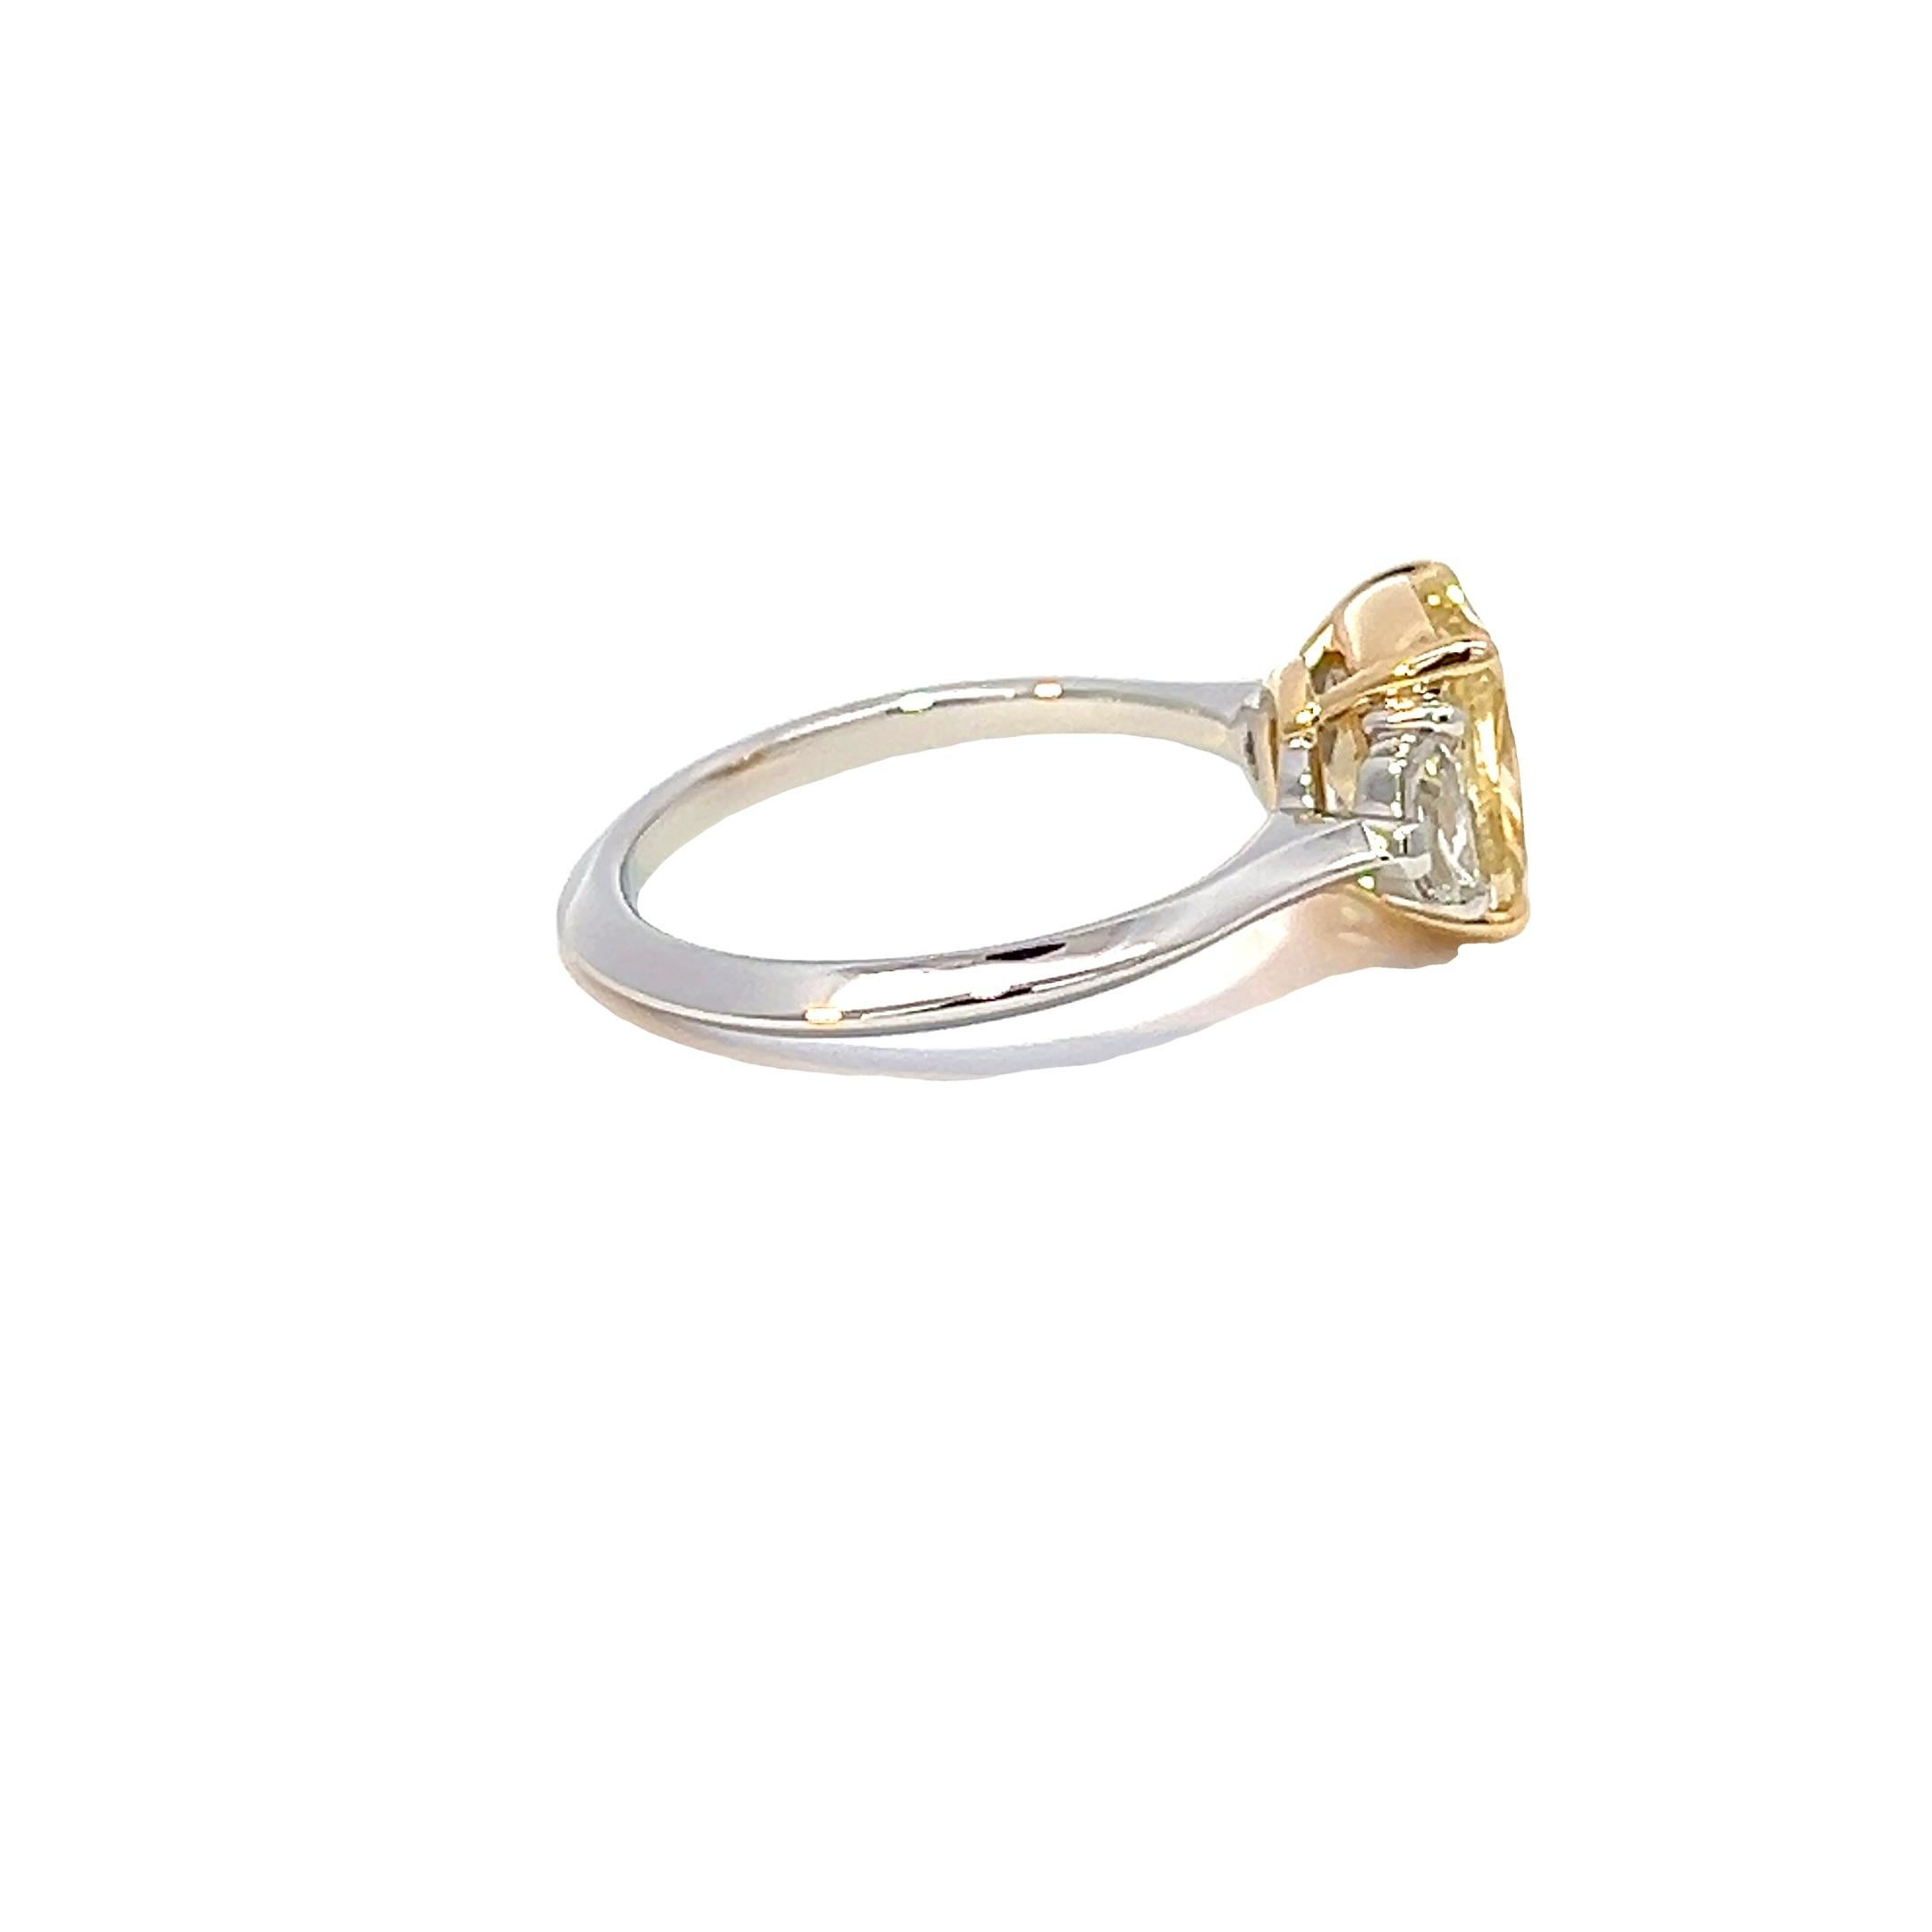 2.85CT Total Weight Fancy Intense Yellow Diamond Ring, GIA Cert In New Condition For Sale In New York, NY